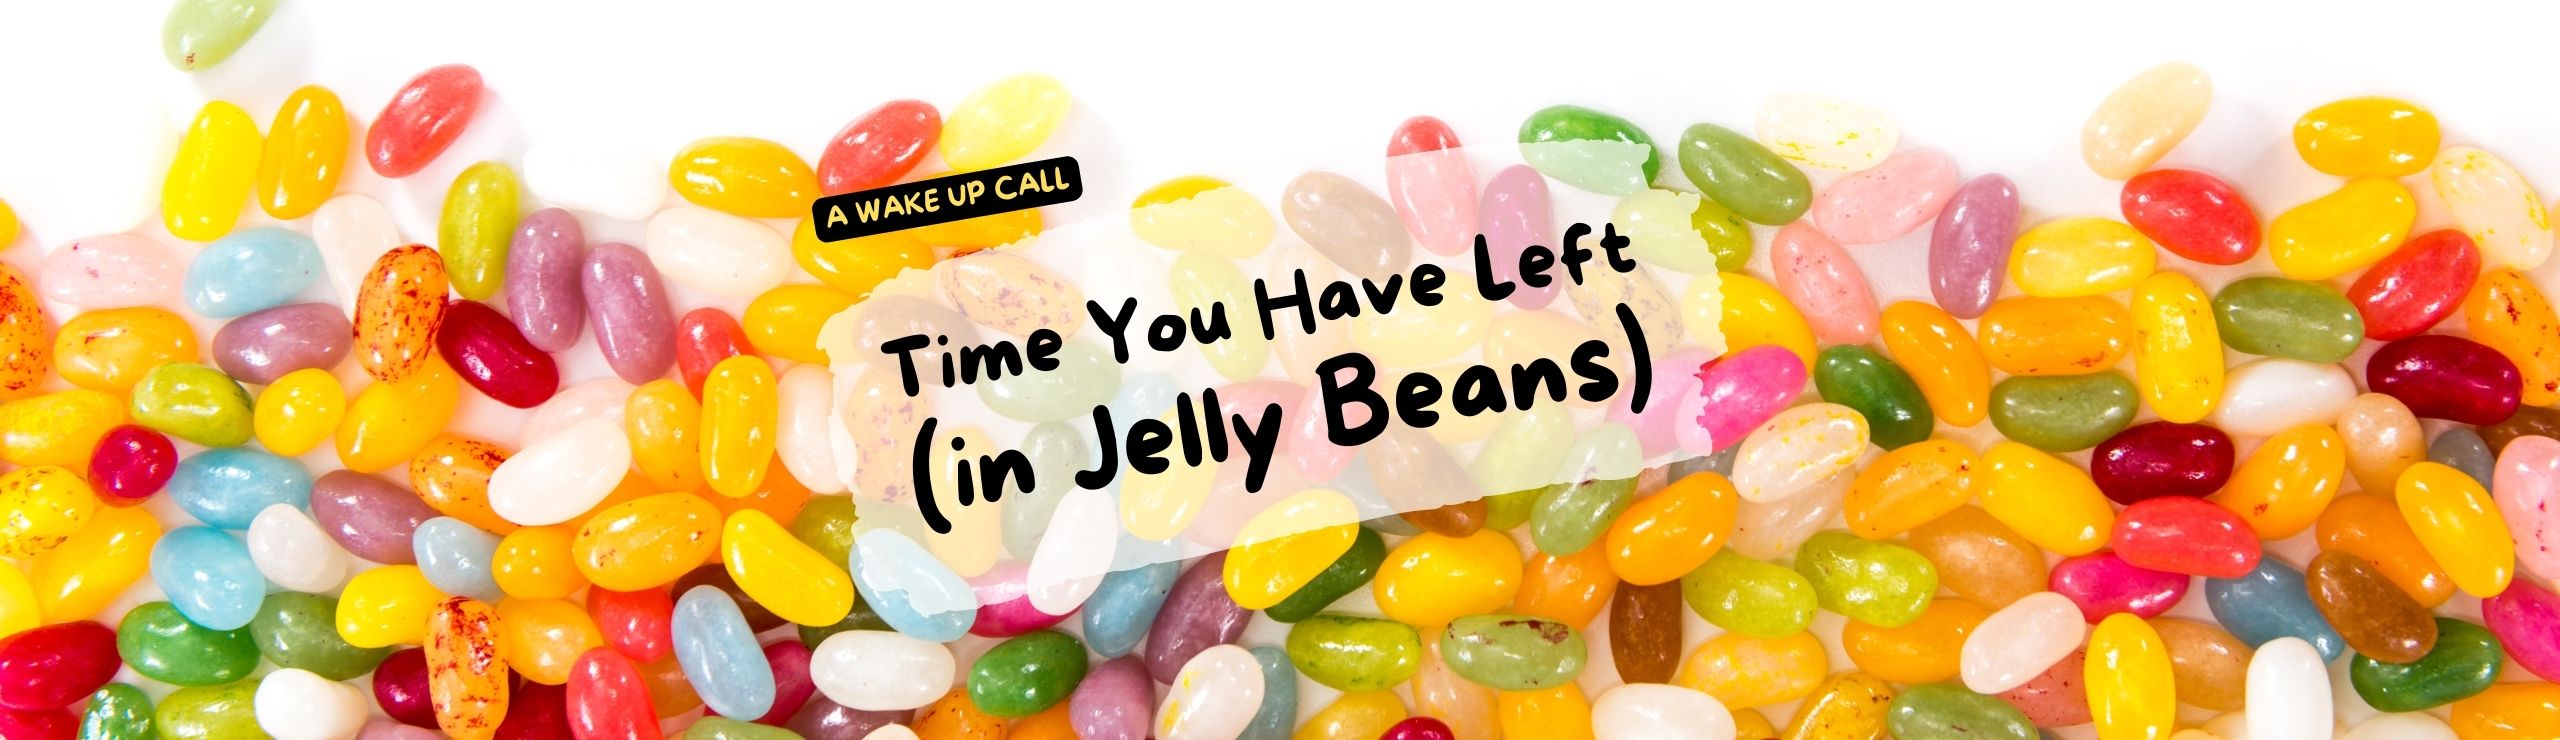 The Time You Have Left (in Jelly Beans)